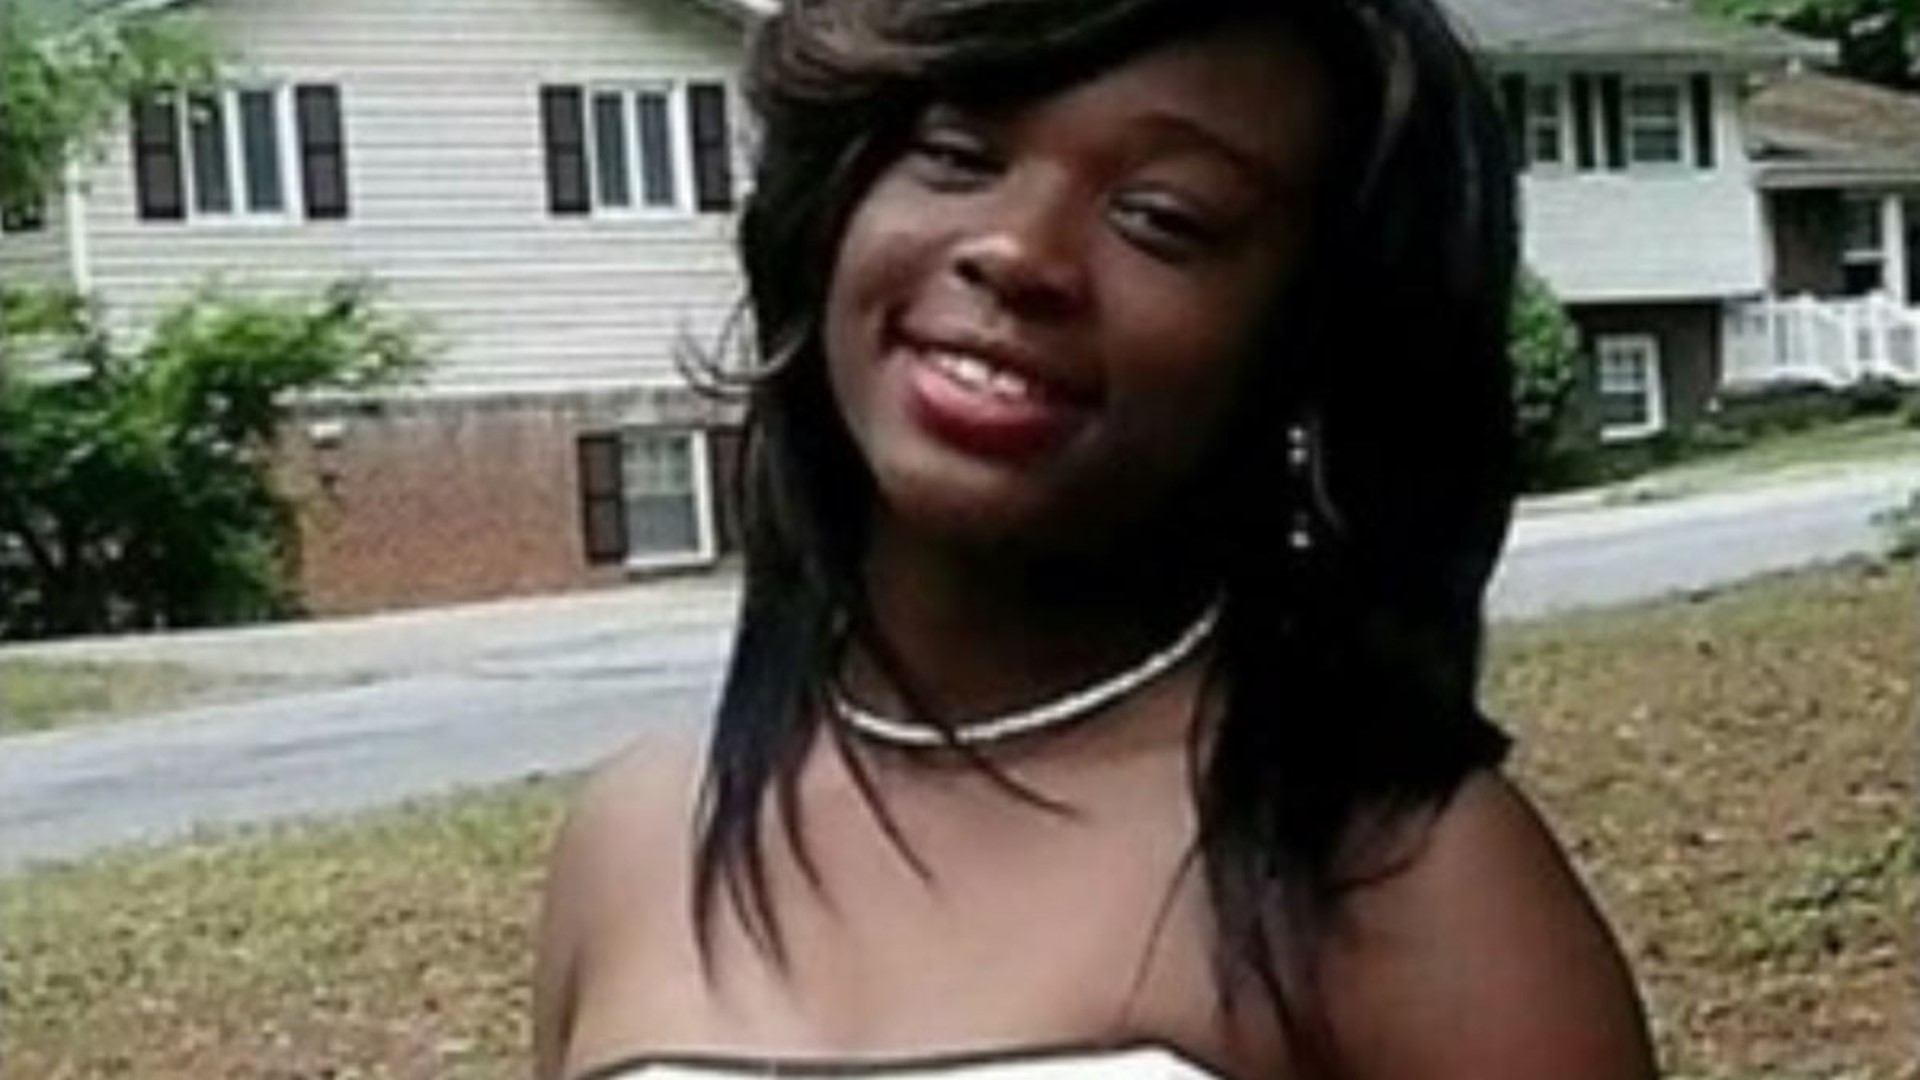 Amira Cameron was killed in 2015 at just 15-years-old. Her killers were just sentenced to life in prison without parole.